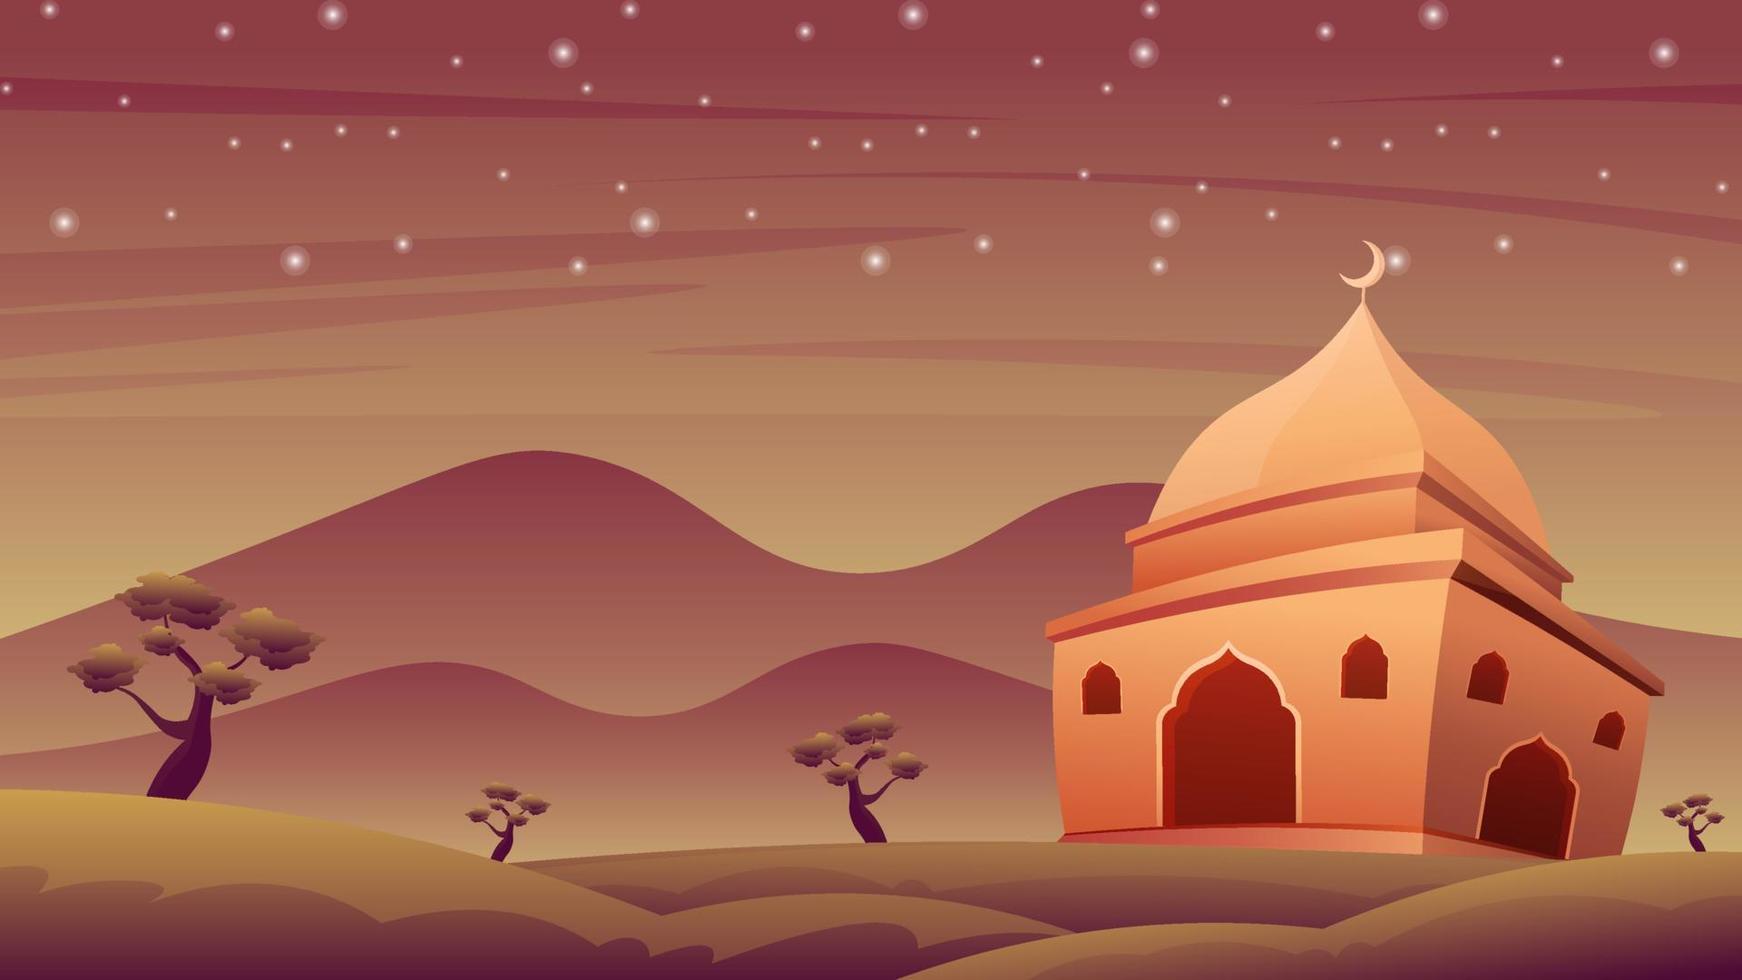 Awesome mosque mountain vector design landscape illustration